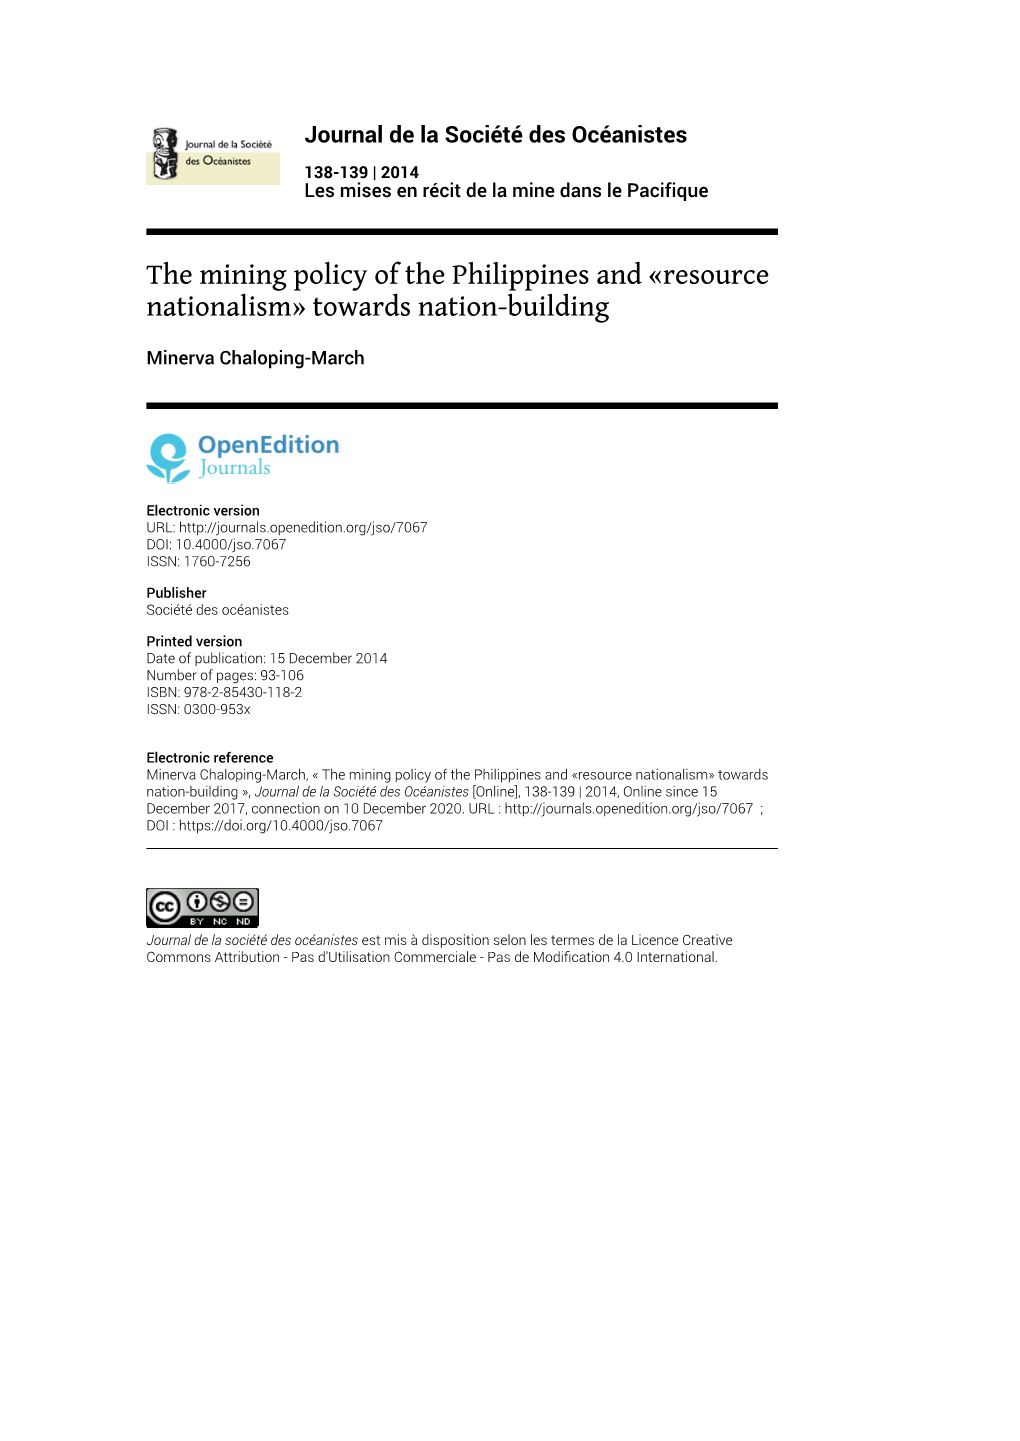 The Mining Policy of the Philippines and «Resource Nationalism» Towards Nation-Building